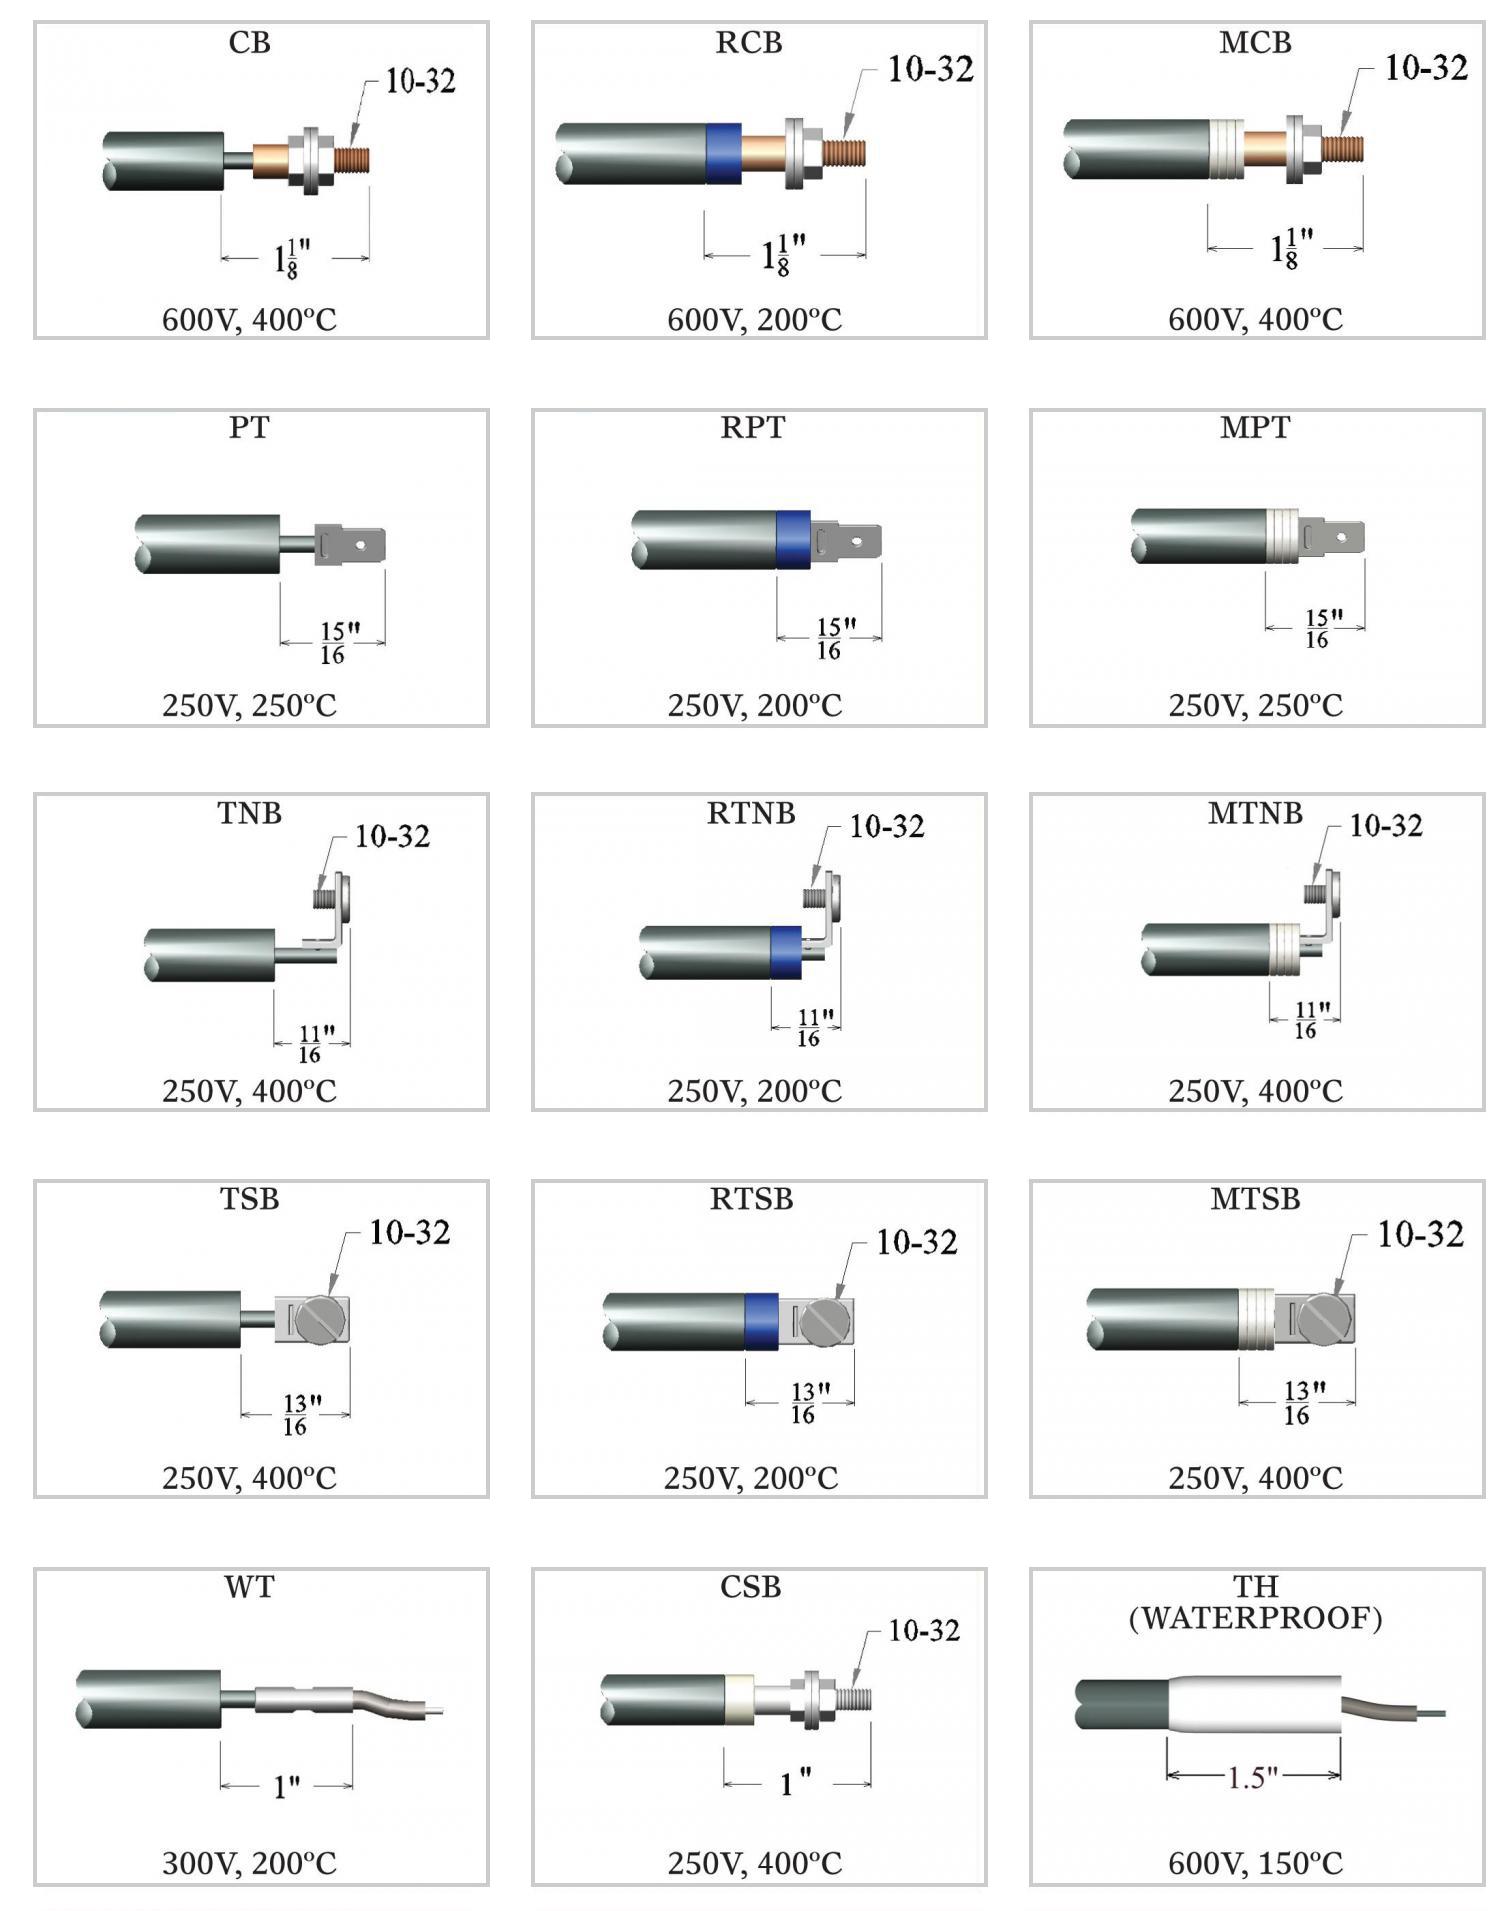 Termination Styles for Straight and Formed Tubular Heaters